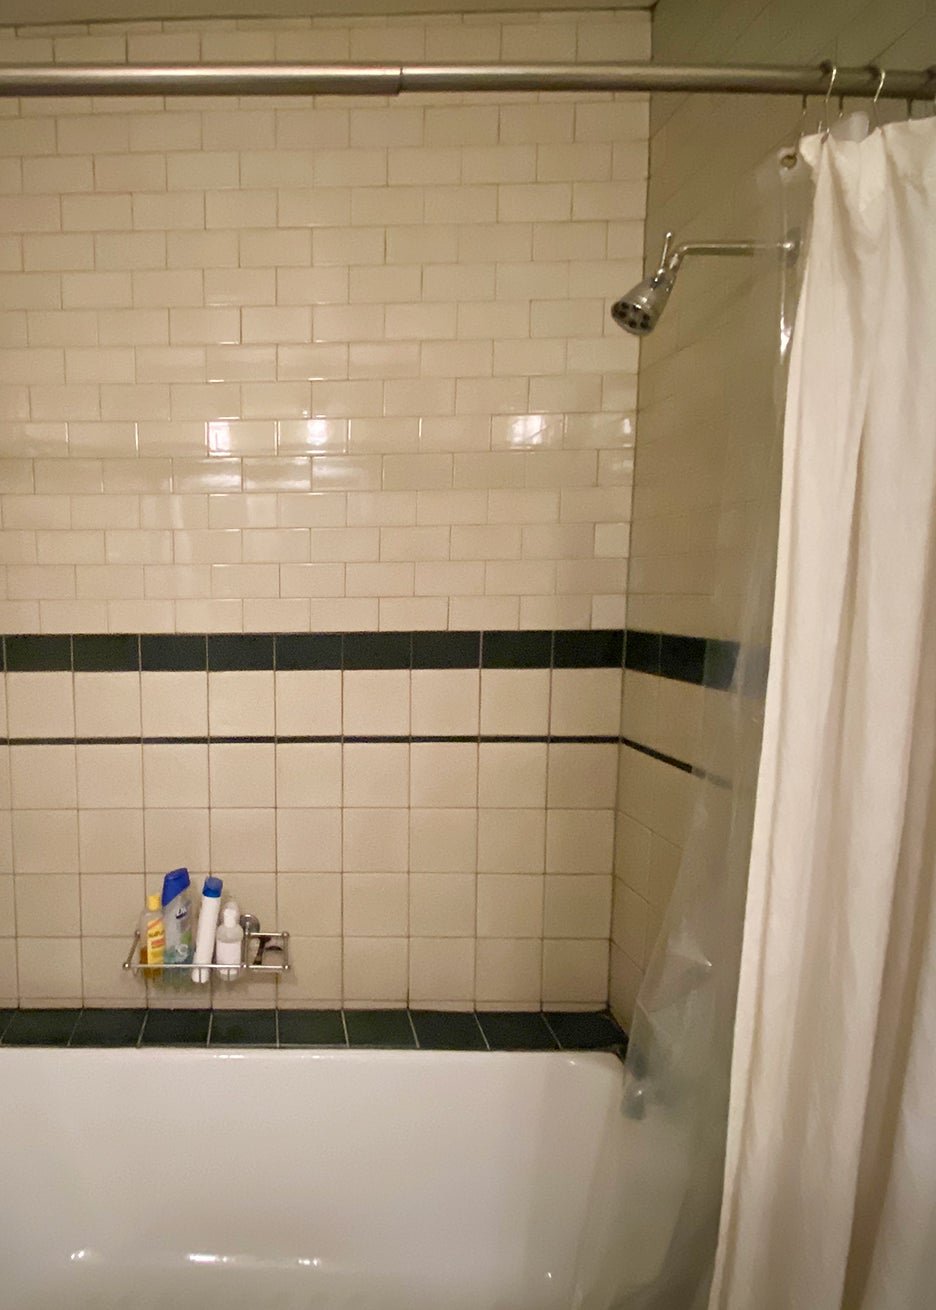 This Windowless Bathroom Exudes Nothing but Bright, Light Energy